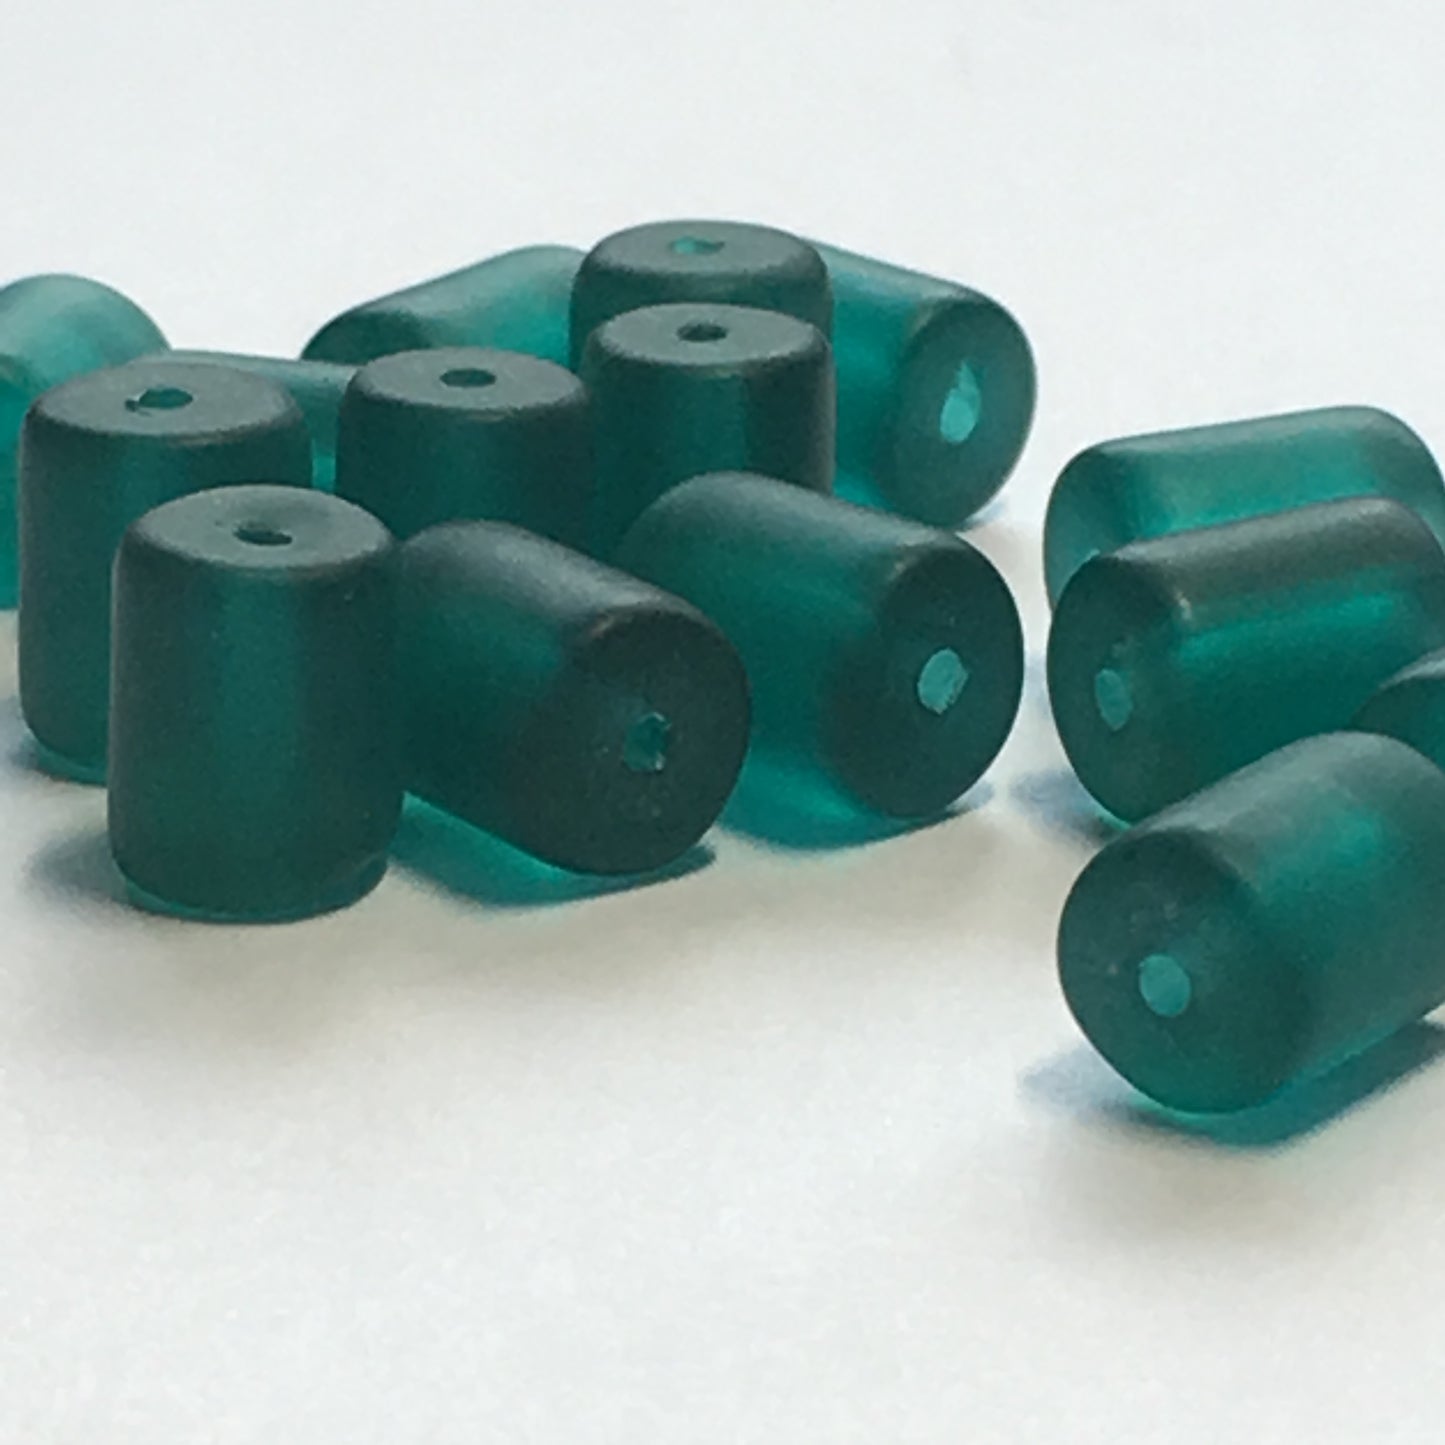 Frosted Teal Green Glass Roller Beads, 8 x 6 mm, 15 Beads